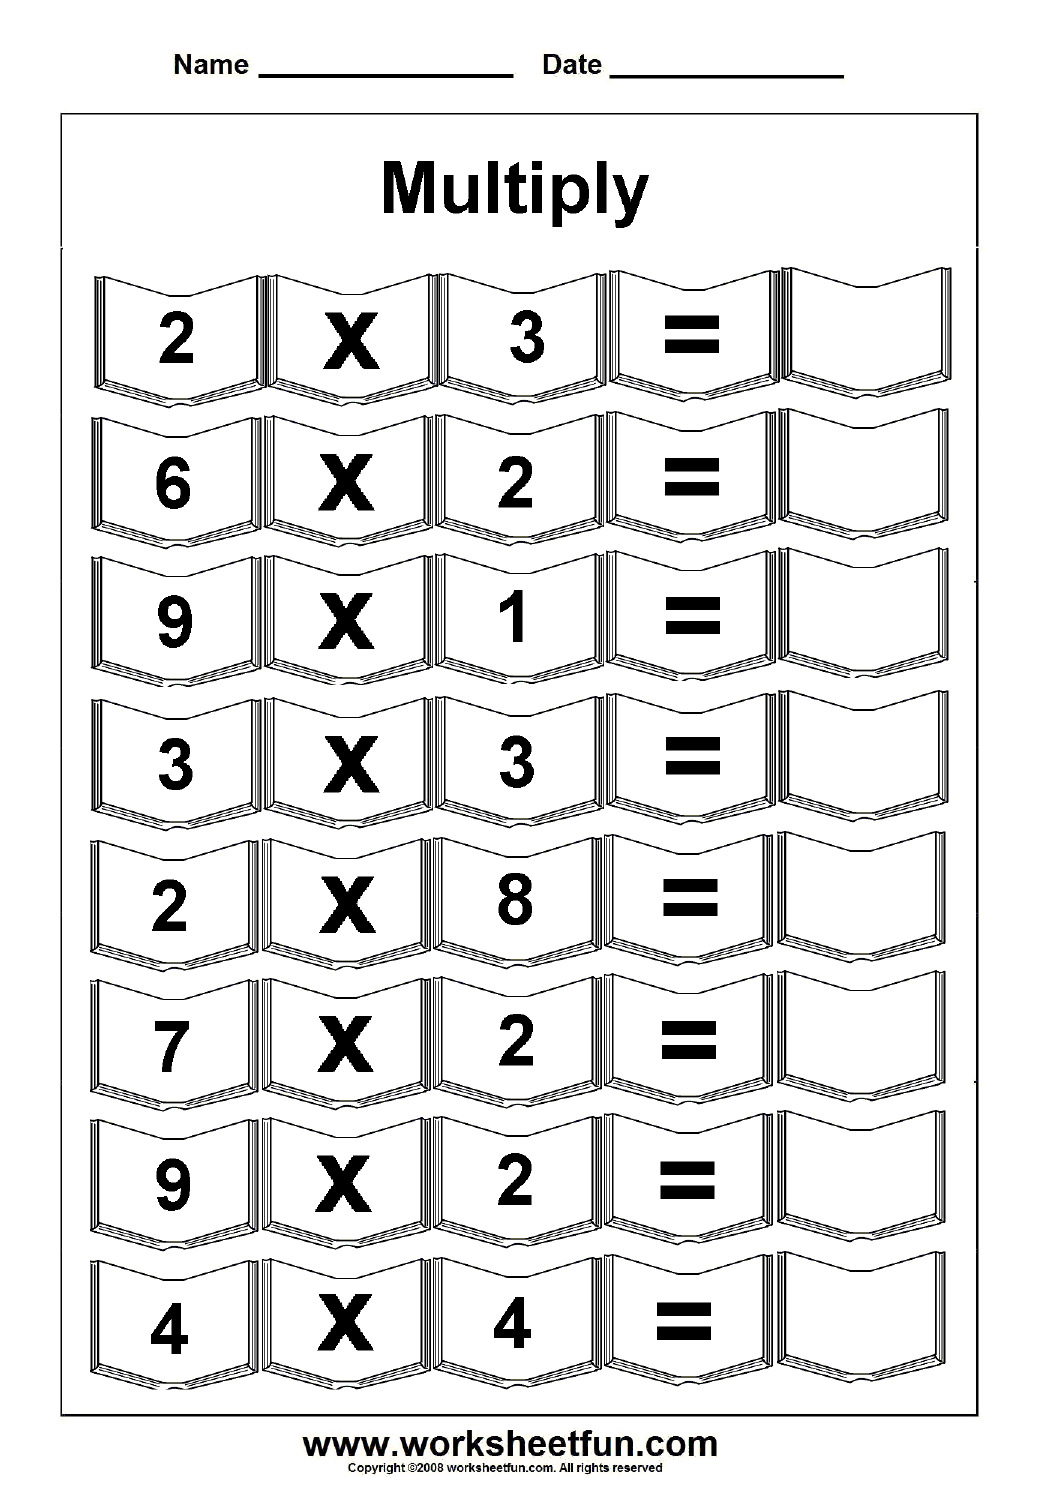 download-printable-4th-grade-multiplication-worksheets-collection